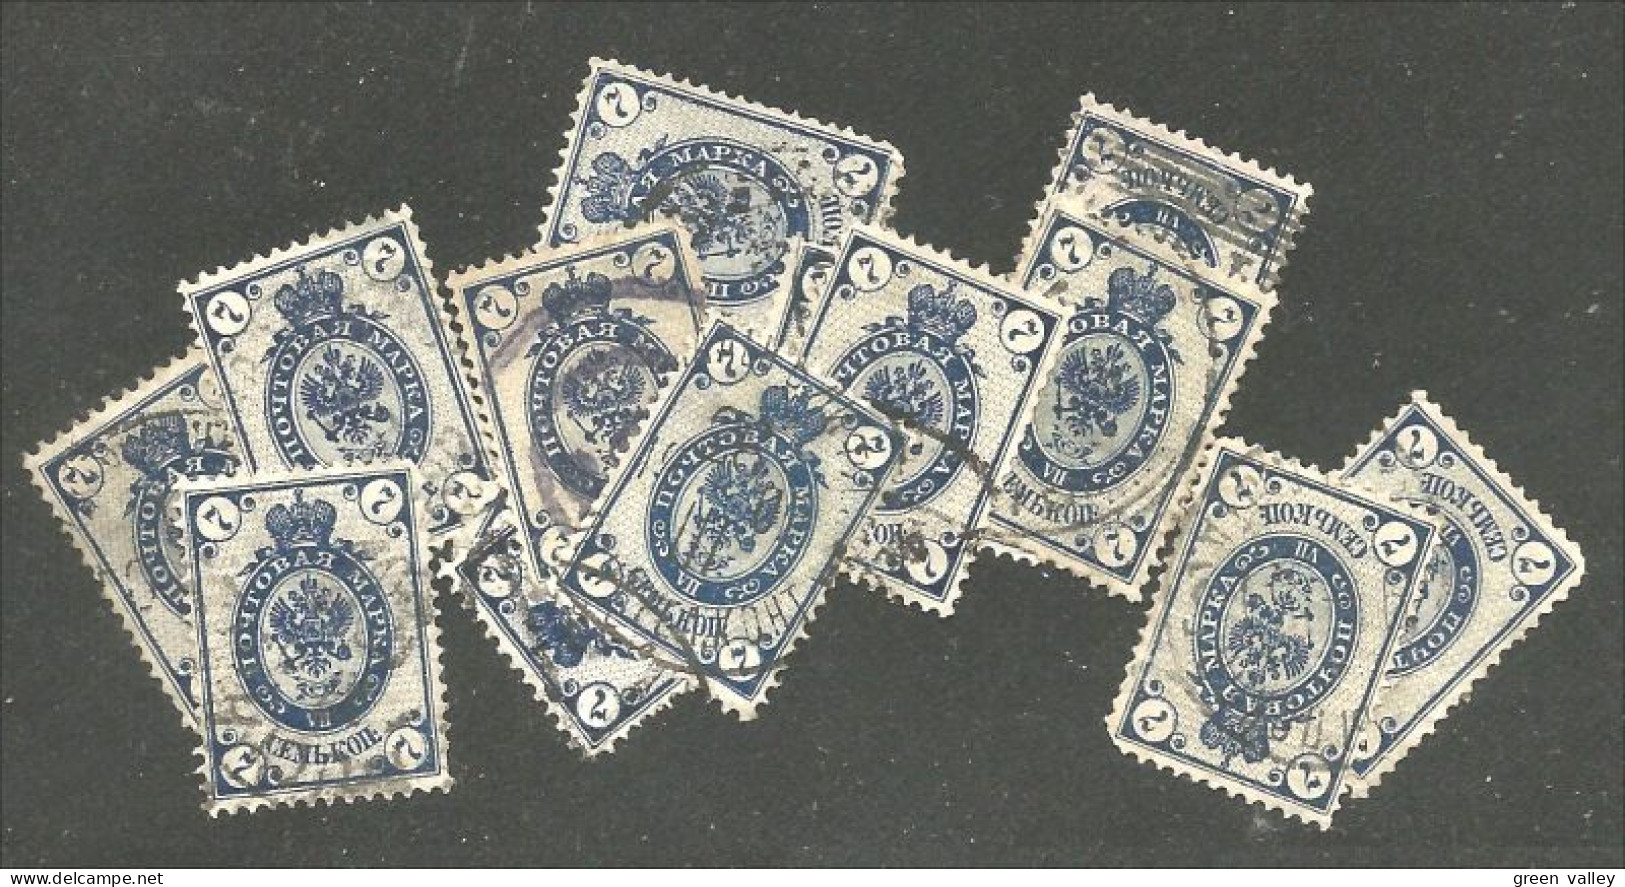 771 Russie 7k 1889 Blue 35+ Stamps For Study Aigle Imperial Eagle Post Horn Cor Postal (RUZ-341) - Gebraucht